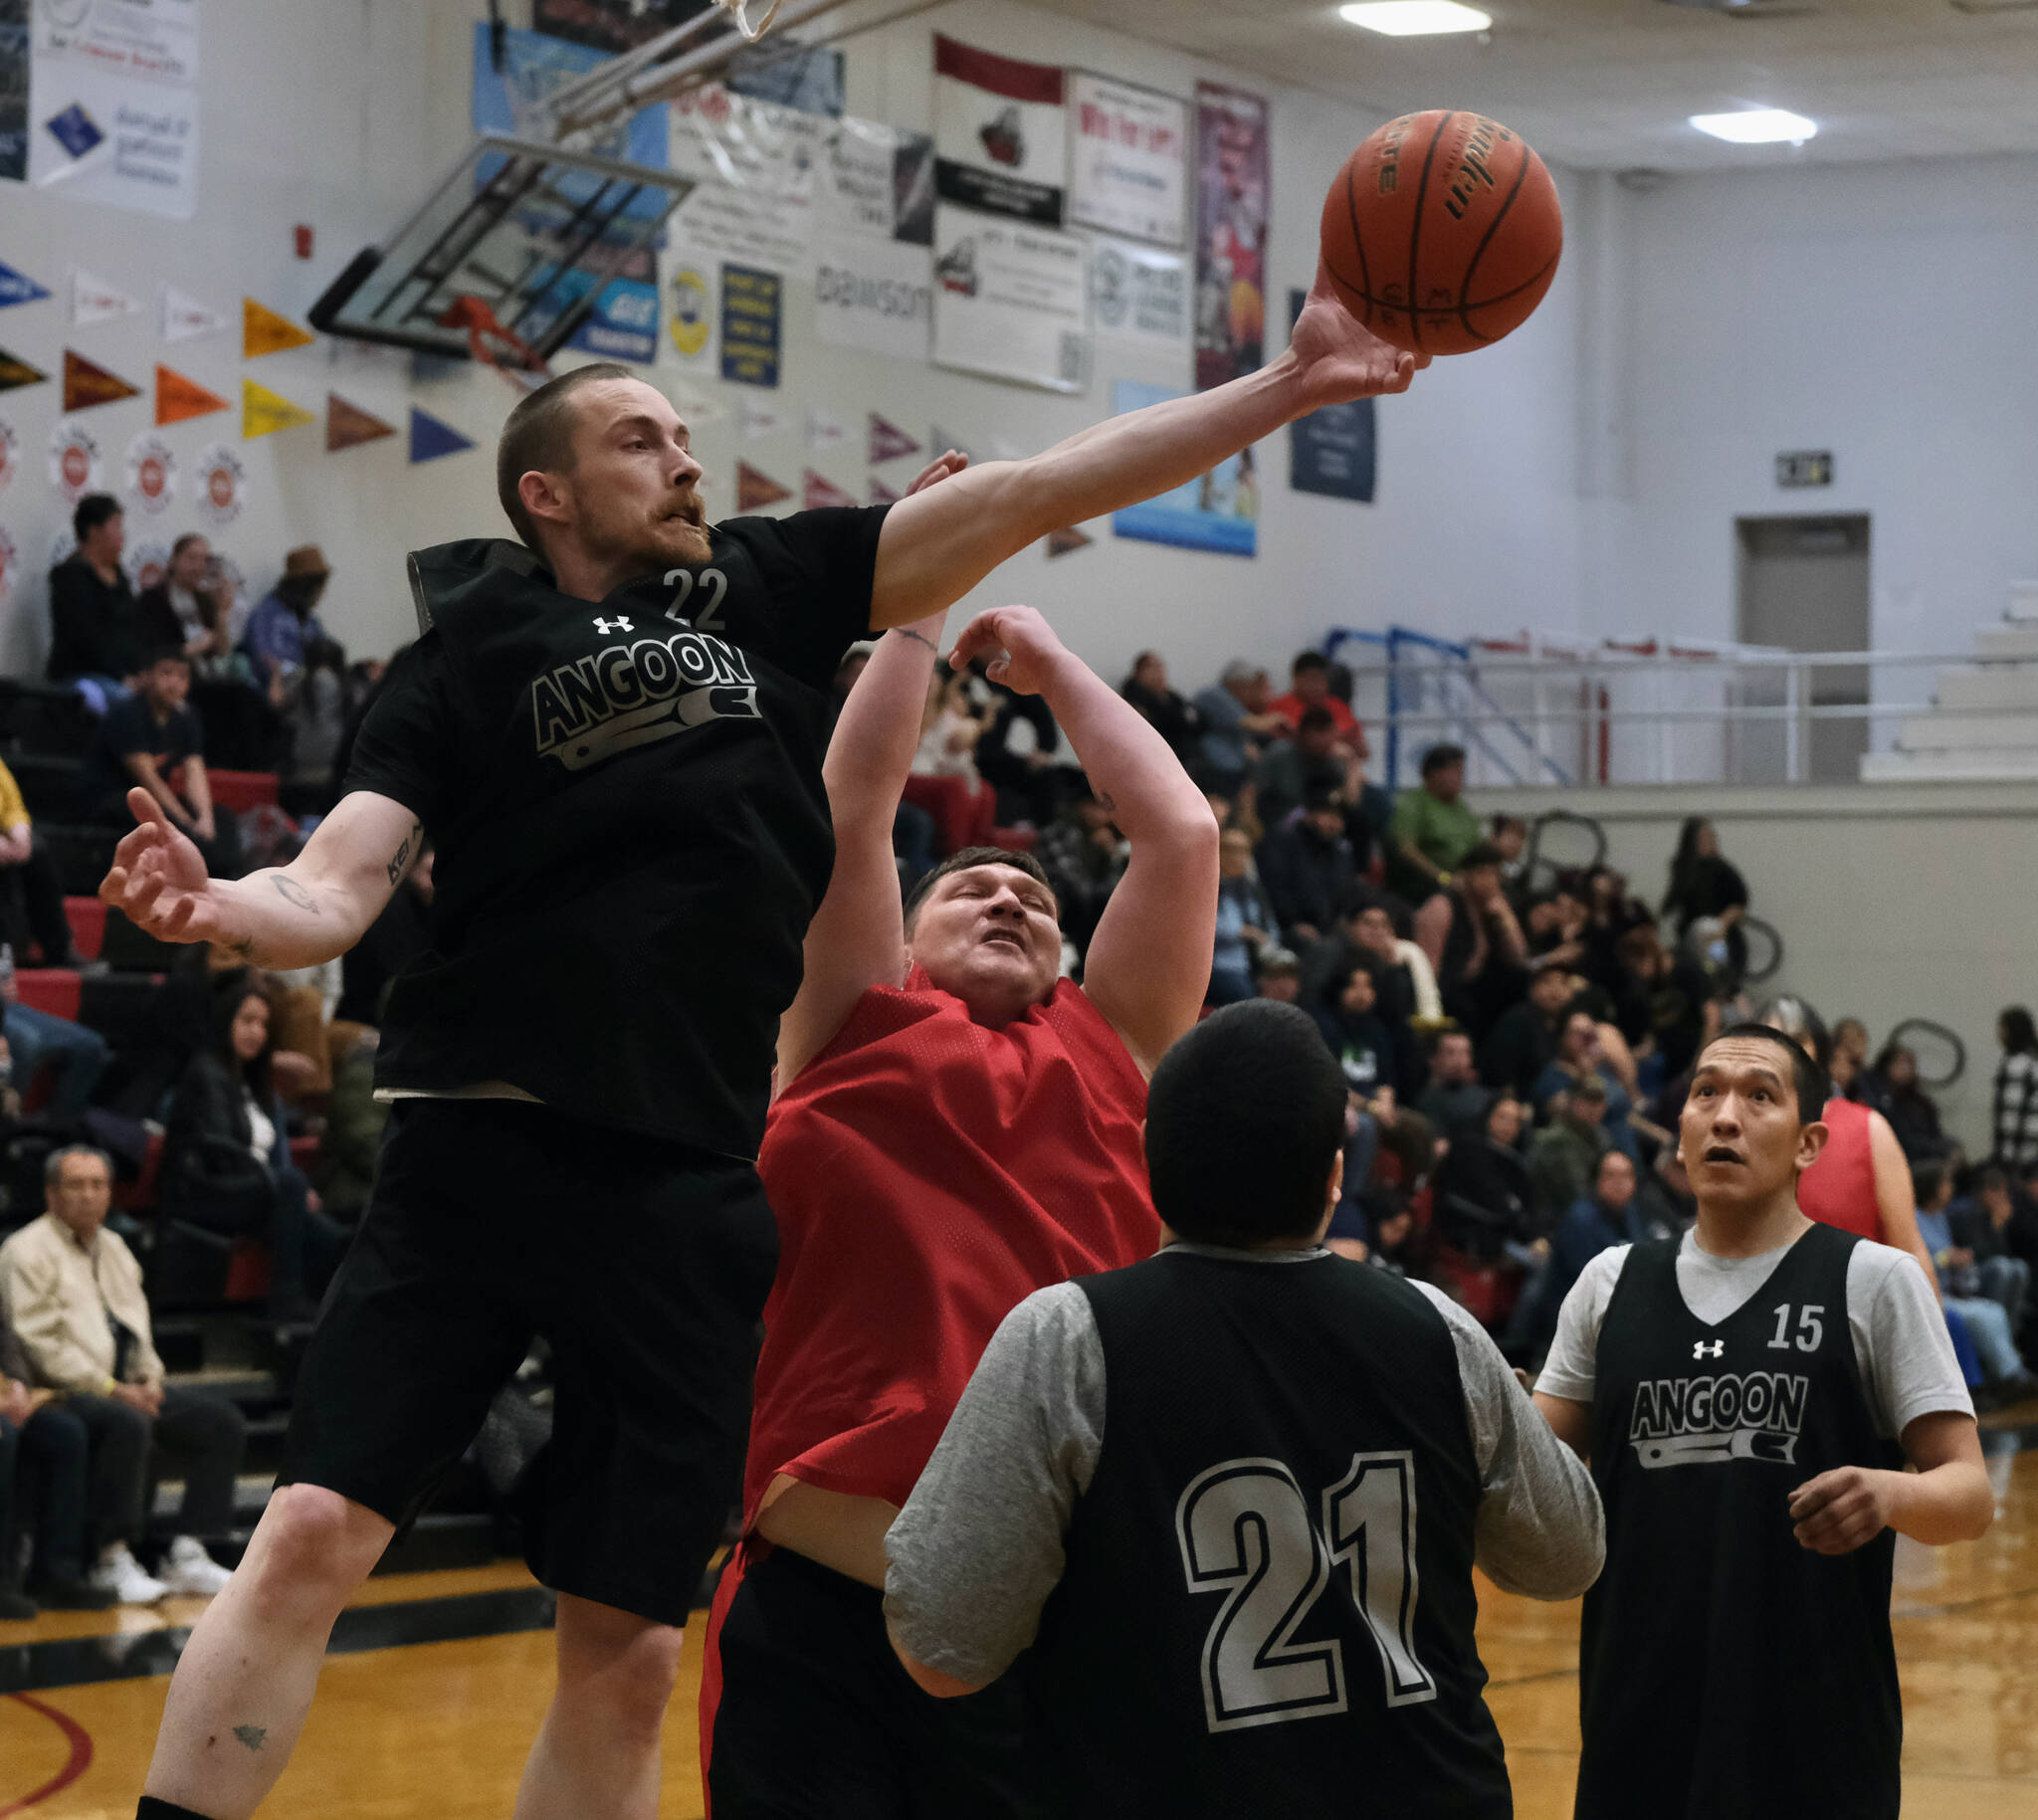 Angoon’s Ivan Raney (22) reaches for a rebound over Kake’s Jess Ross during C Bracket action in the Gold Medal Basketball Tournament, Tuesday, March 21, at Juneau-Douglas High School: Yadaa.at Kalé. (Klas Stolpe / For the Juneau Empire)